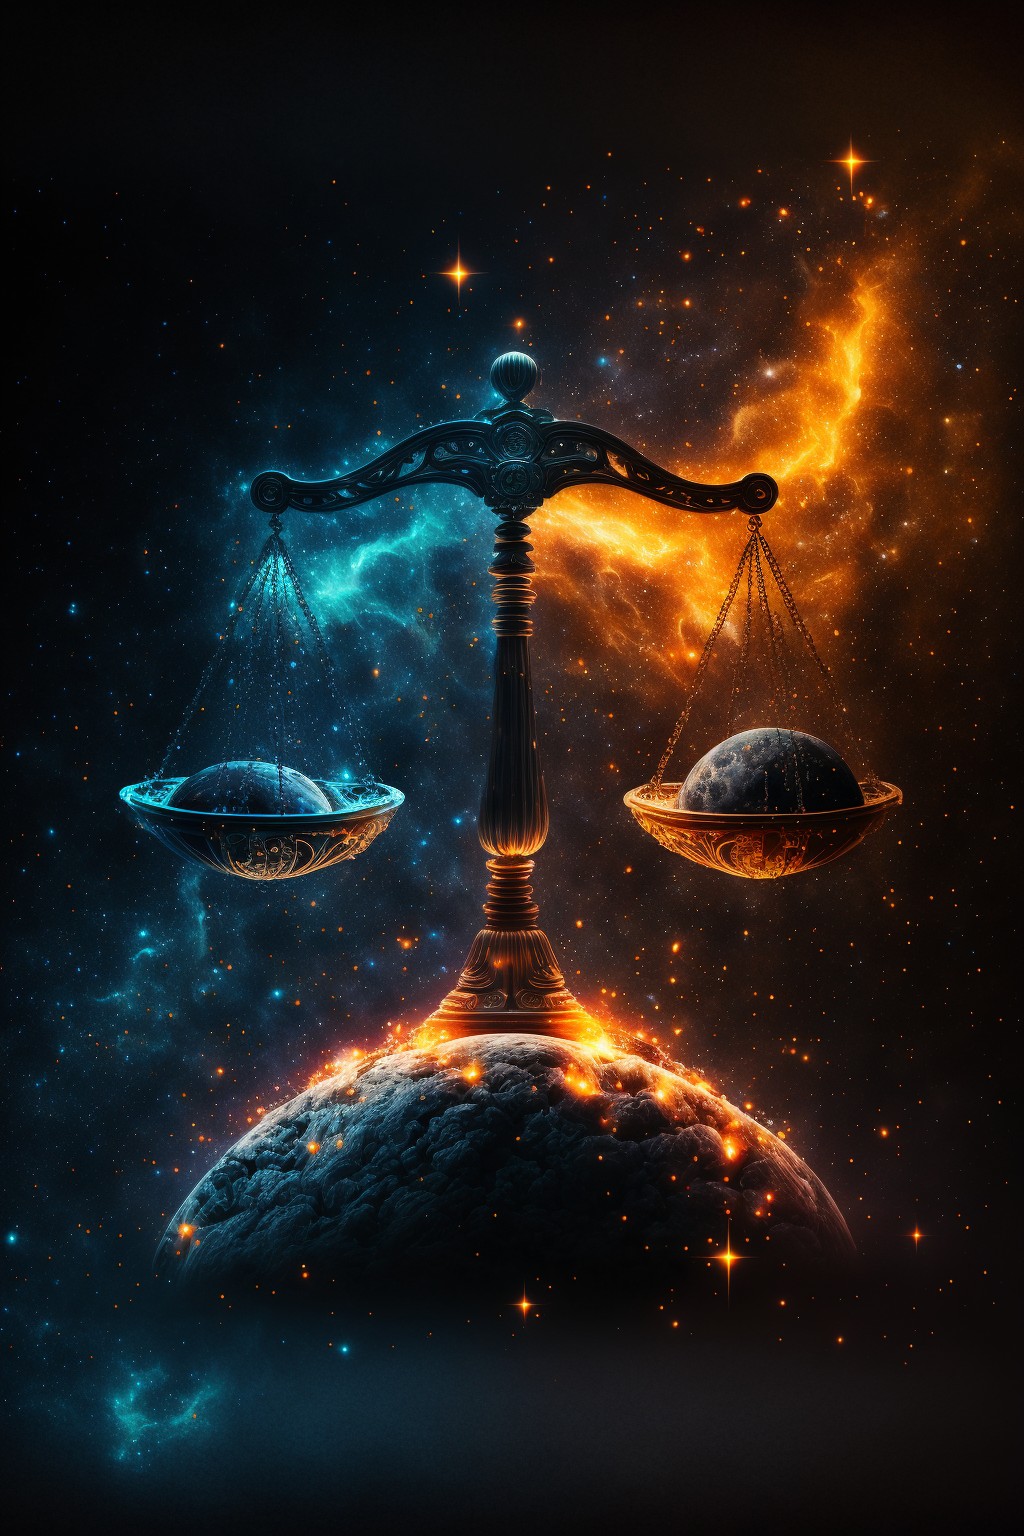 To whom is the balance of the universe tilted?